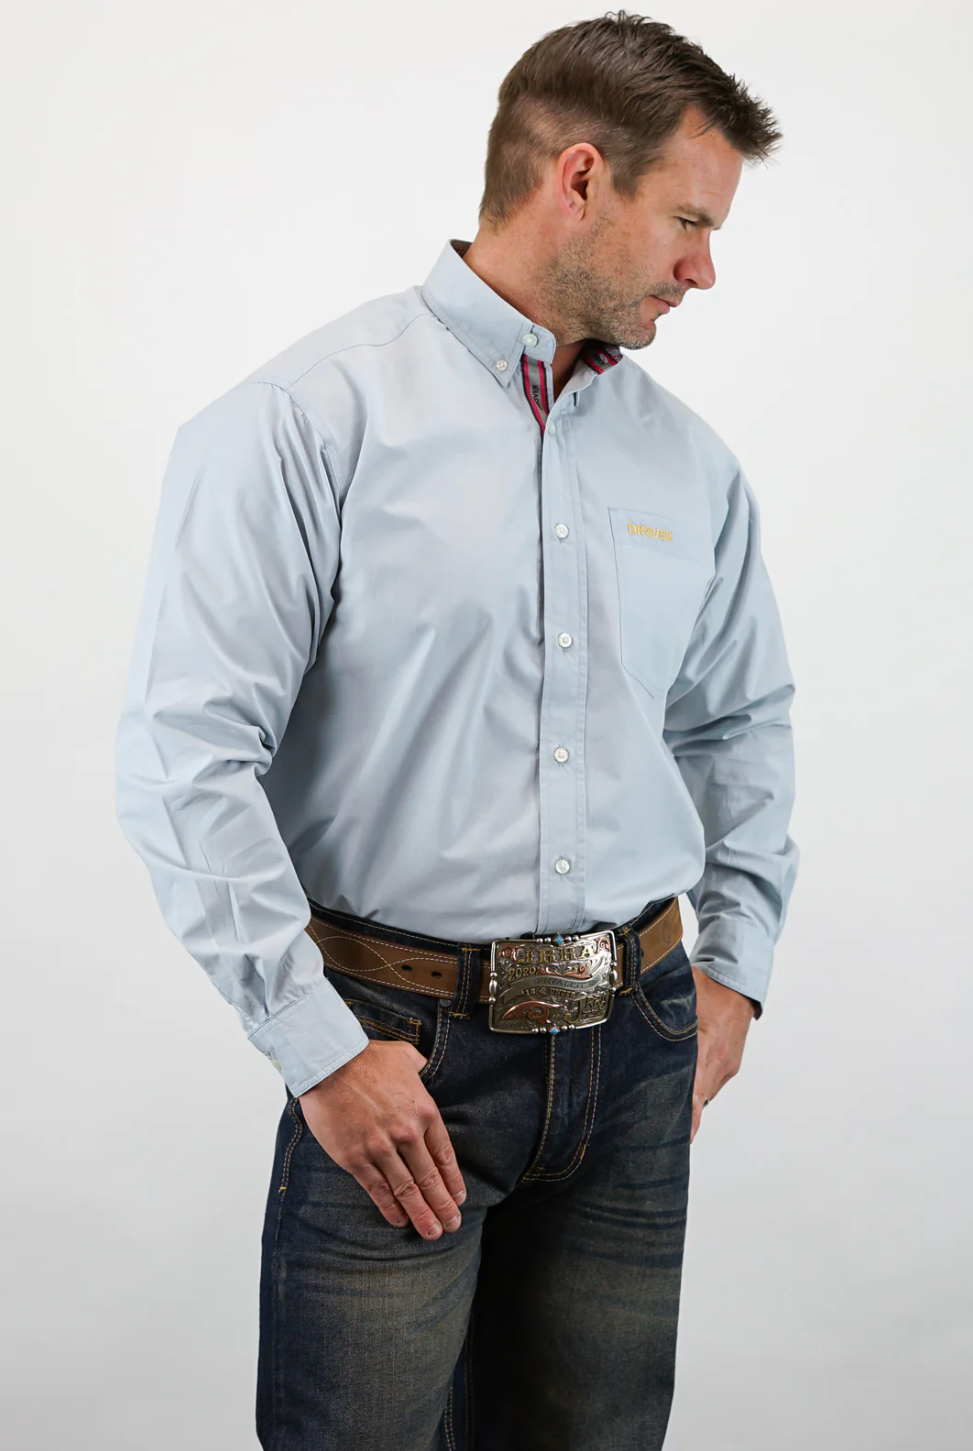 Drover Signature Series - Peacemaker - Solid Niagara Mist Blue, Option Cuff, Classic Fit Shirt D106